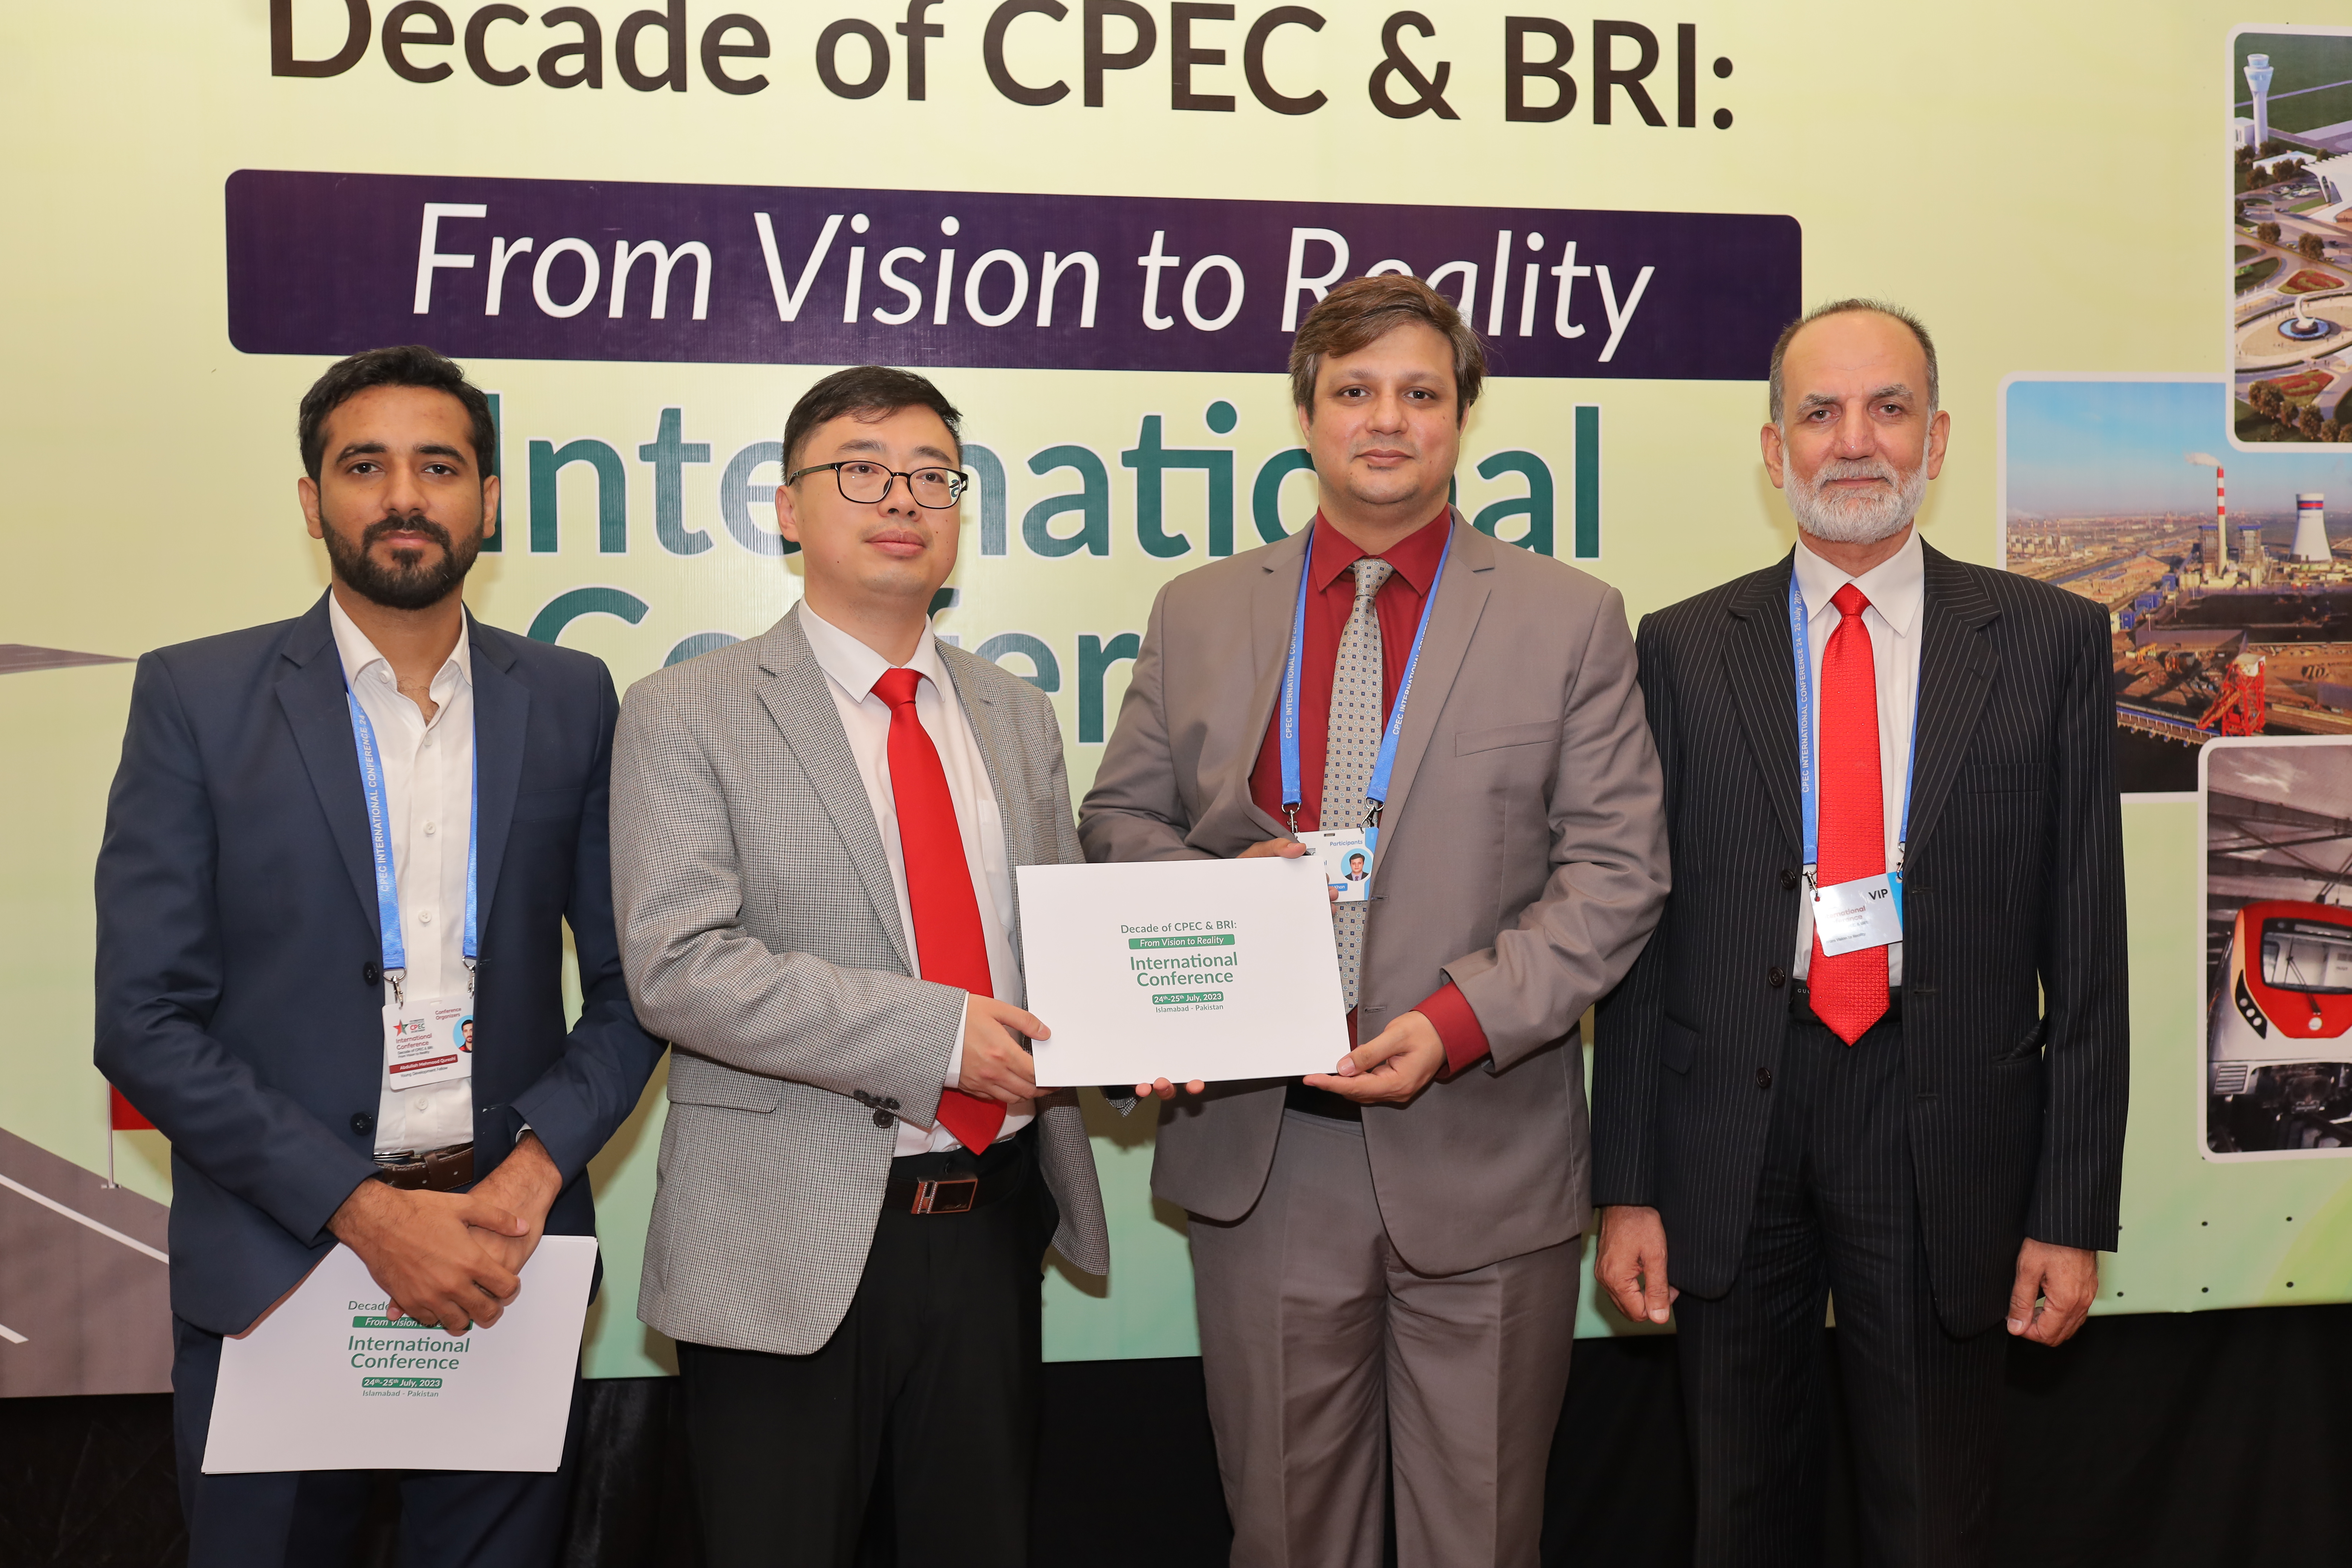 International Conference On Decade Of CPEC & BRI: From Vision To Reality 24th - 25th July 2023